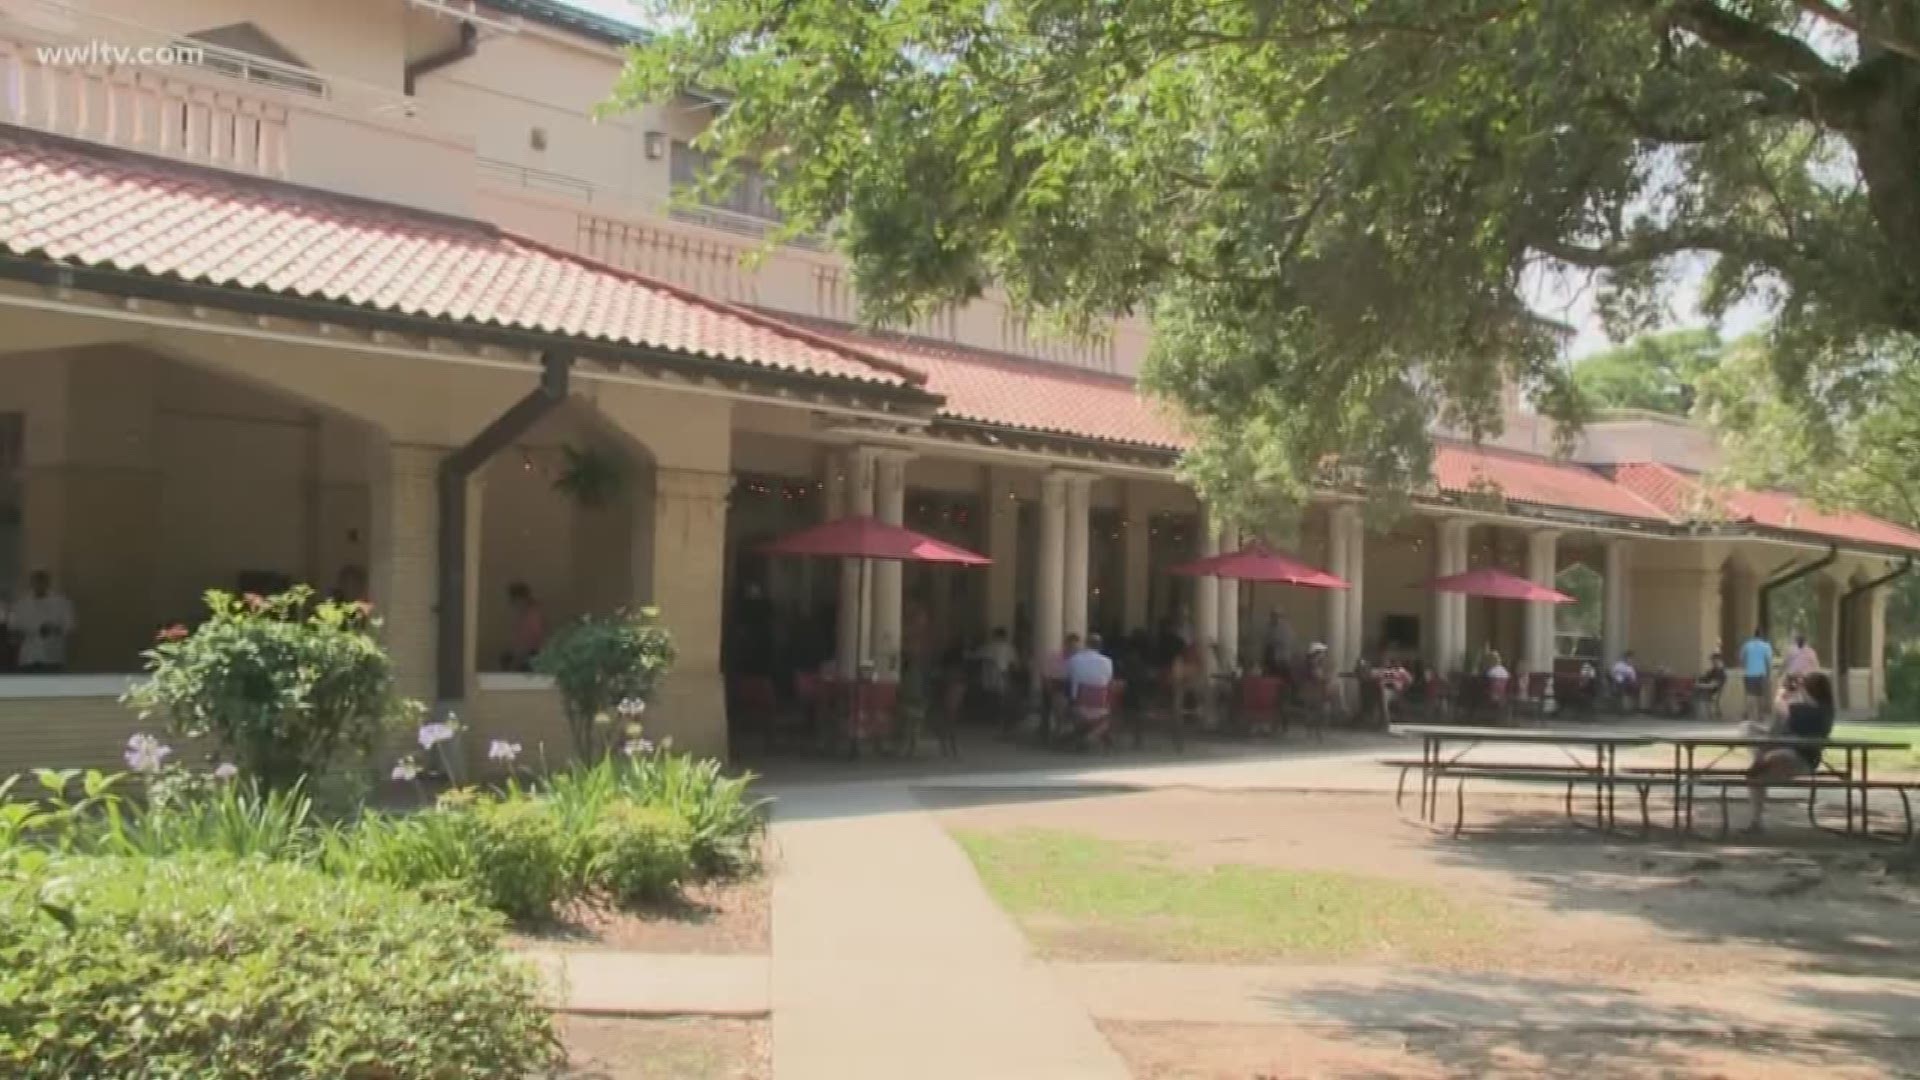 Beignet and coffee stand looks for new home after having to leave City Park